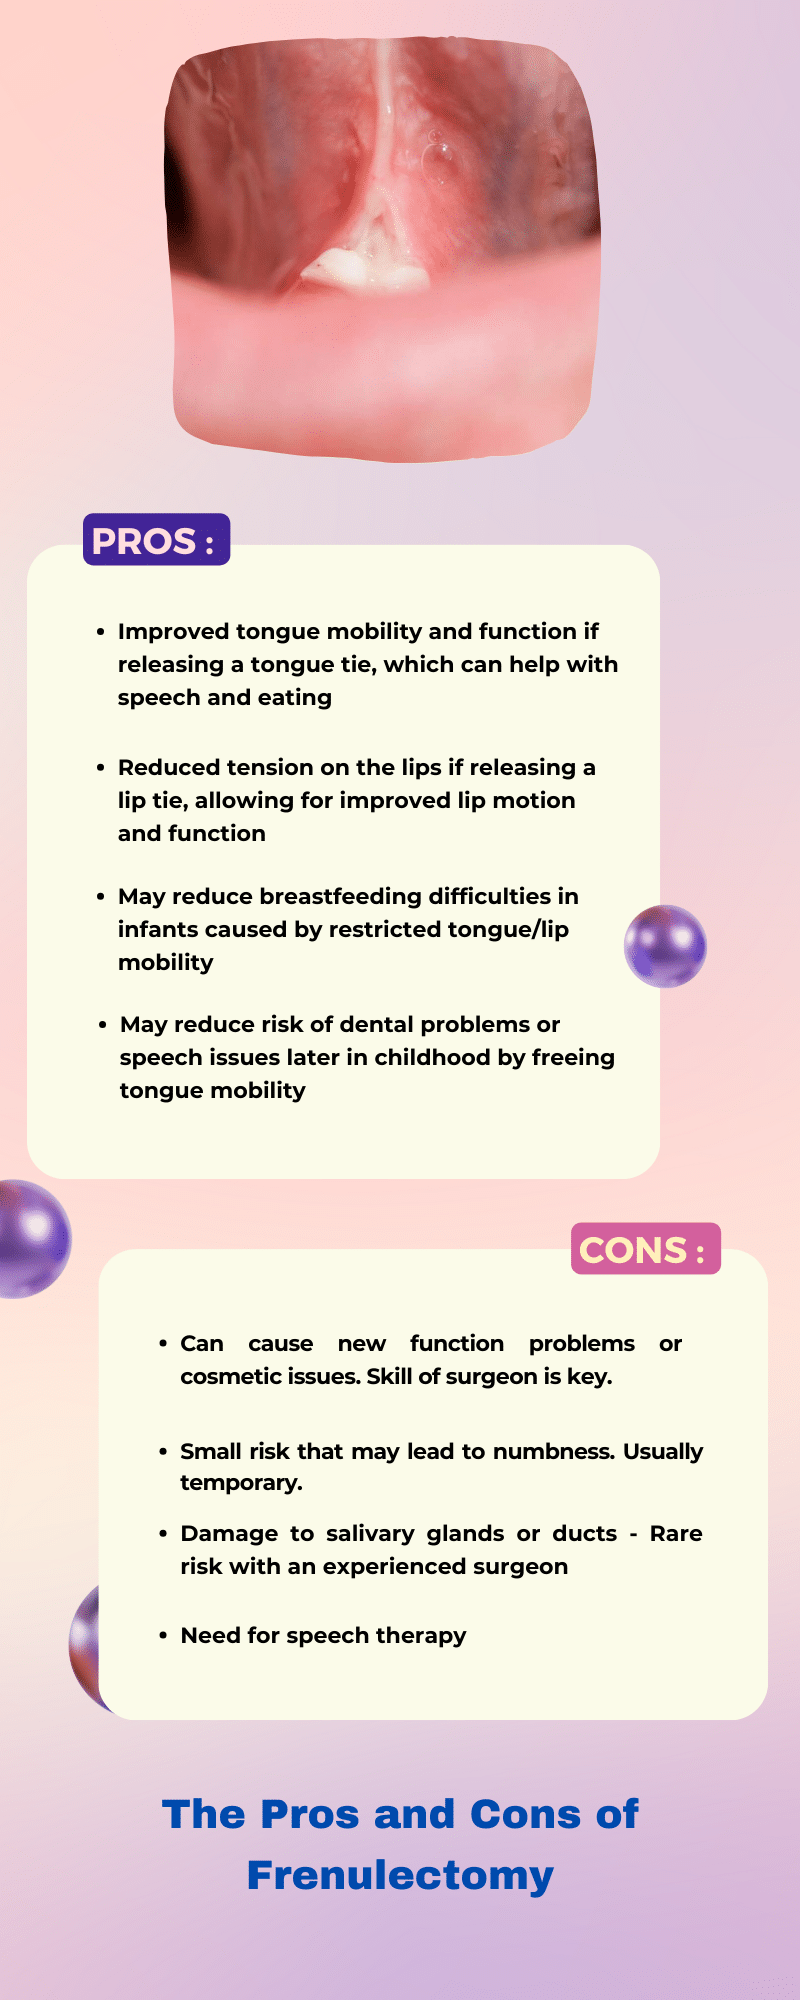 Pros and Cons of Frenulectomy